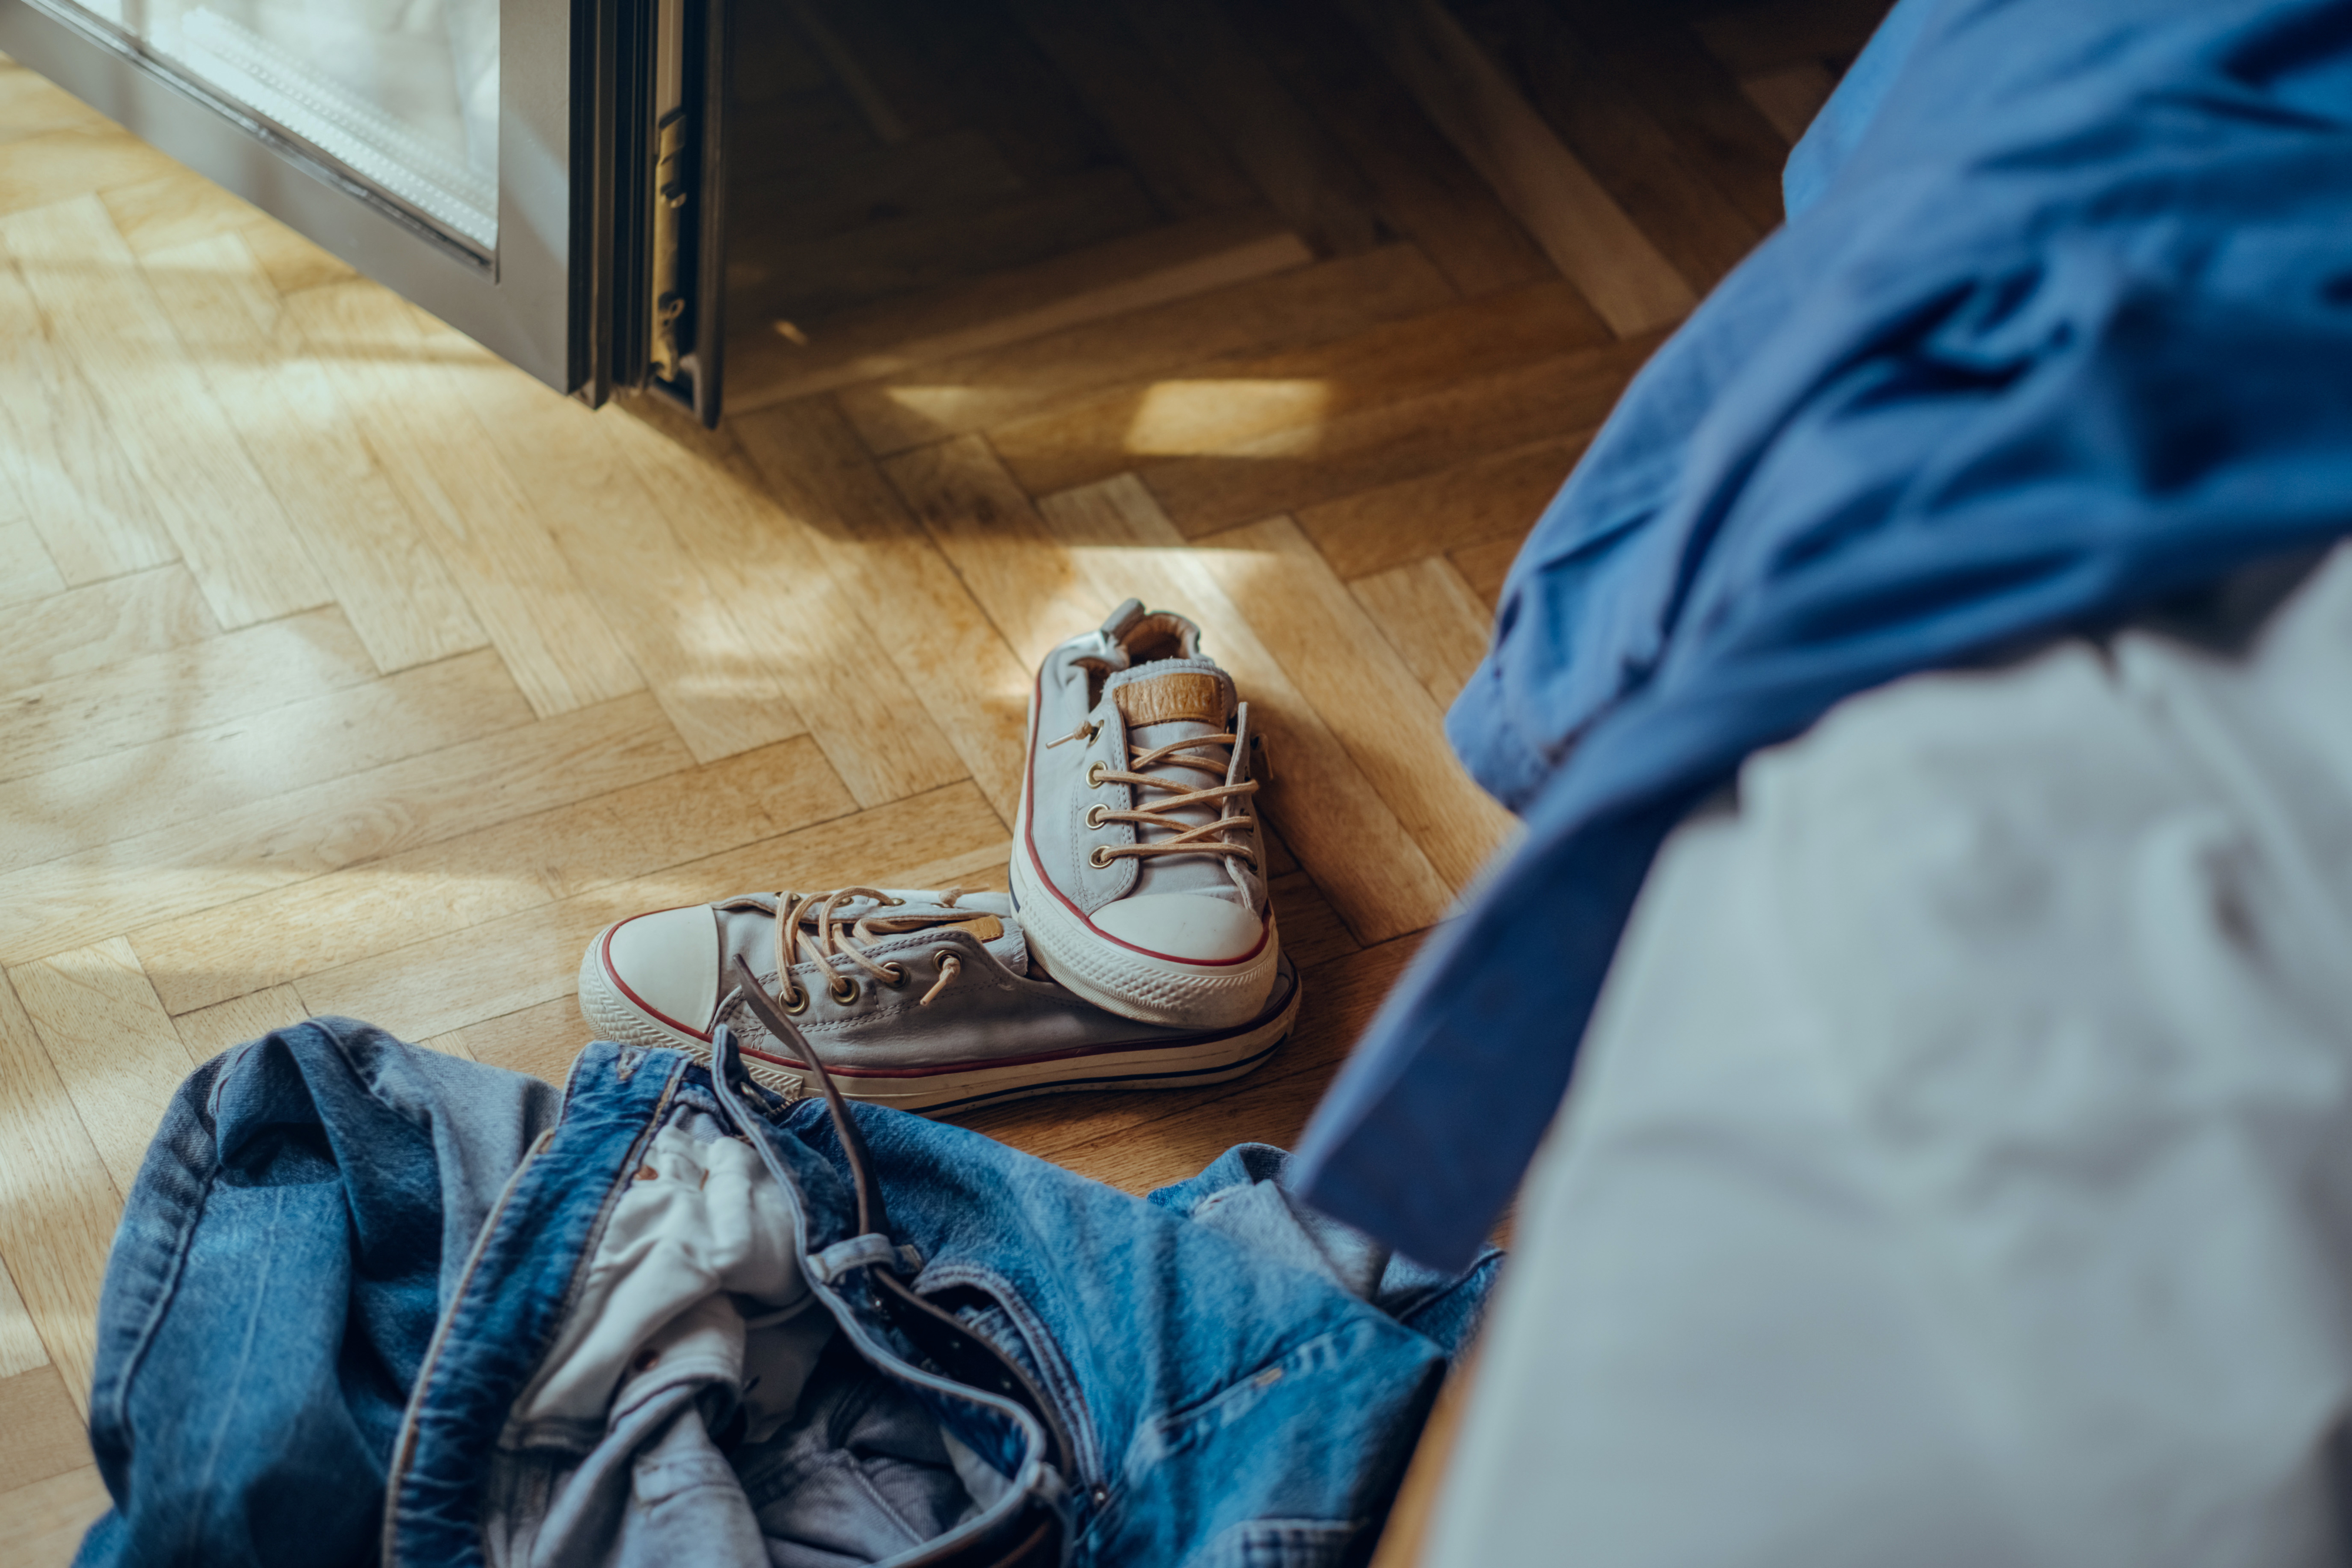 A pair of sneakers placed on a wooden floor next to scattered clothing, including jeans and a blue shirt, near an open door